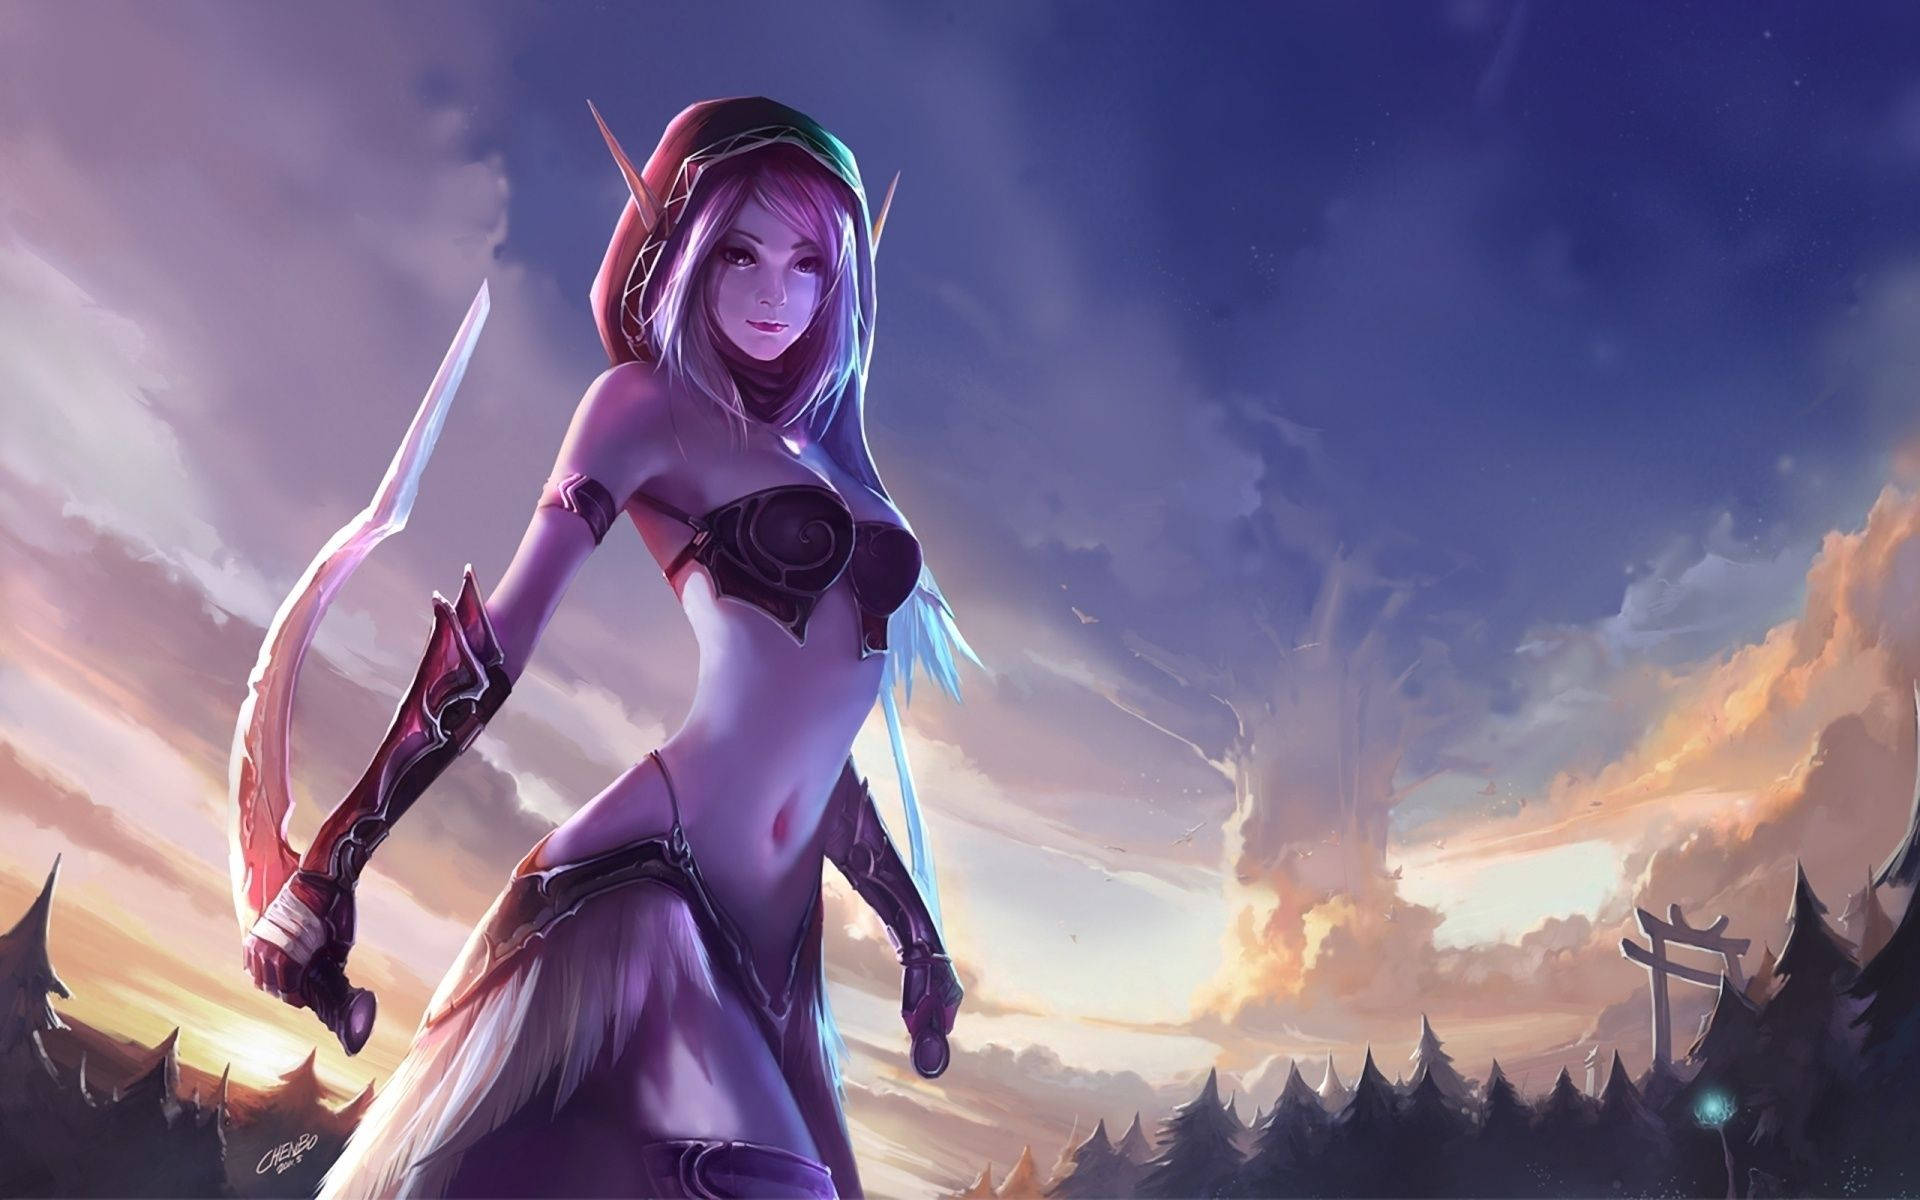 Mysterious Pale Elf Assassin in the Fantasy World Wallpaper